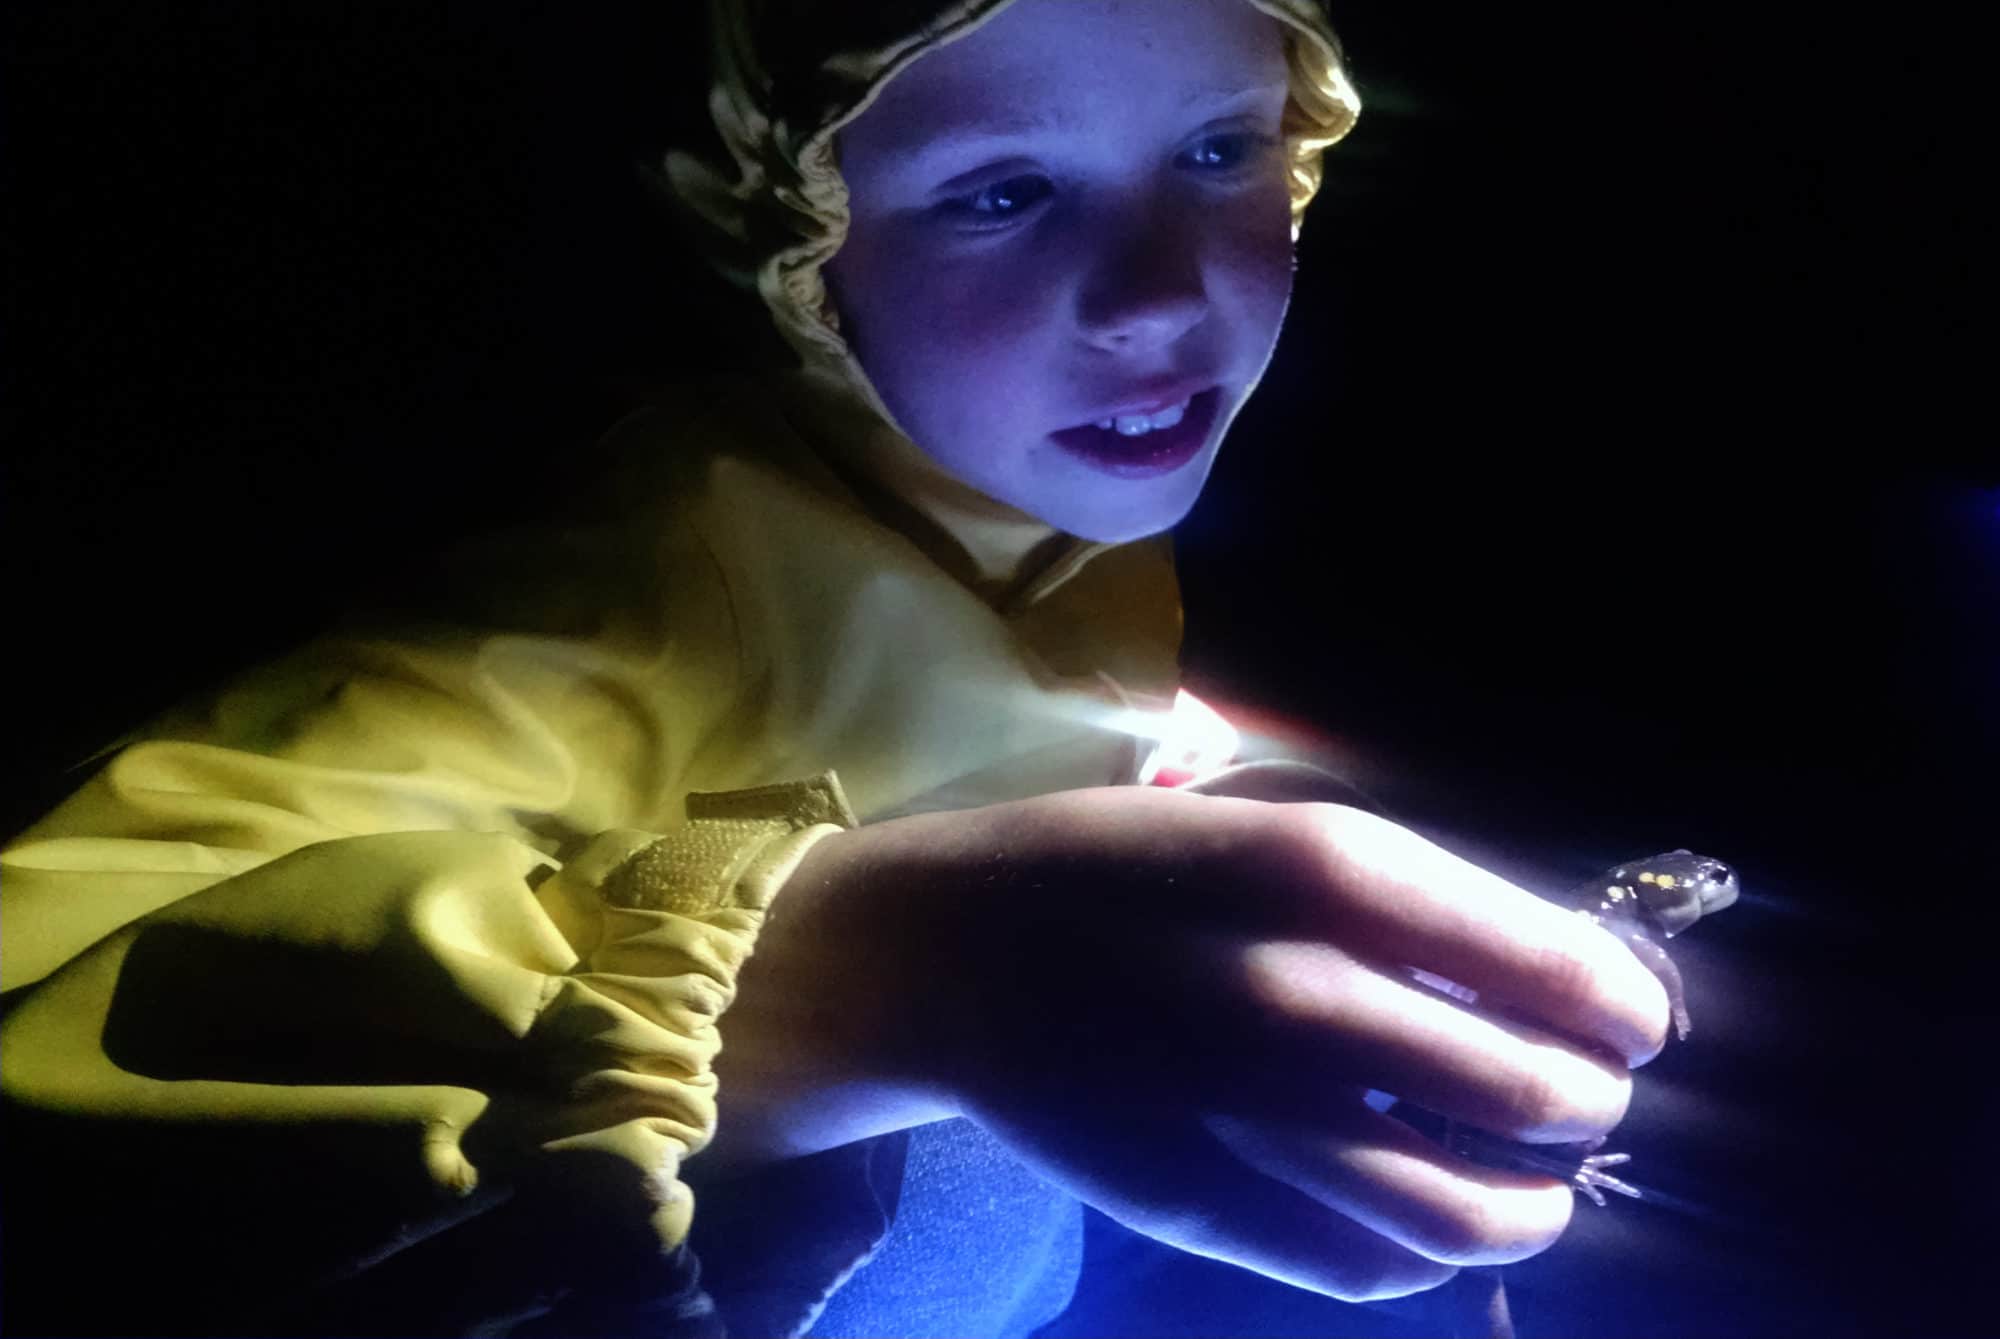 A young Crossing Brigadier gazes at a spotted salamander. (photo © Brett Amy Thelen)